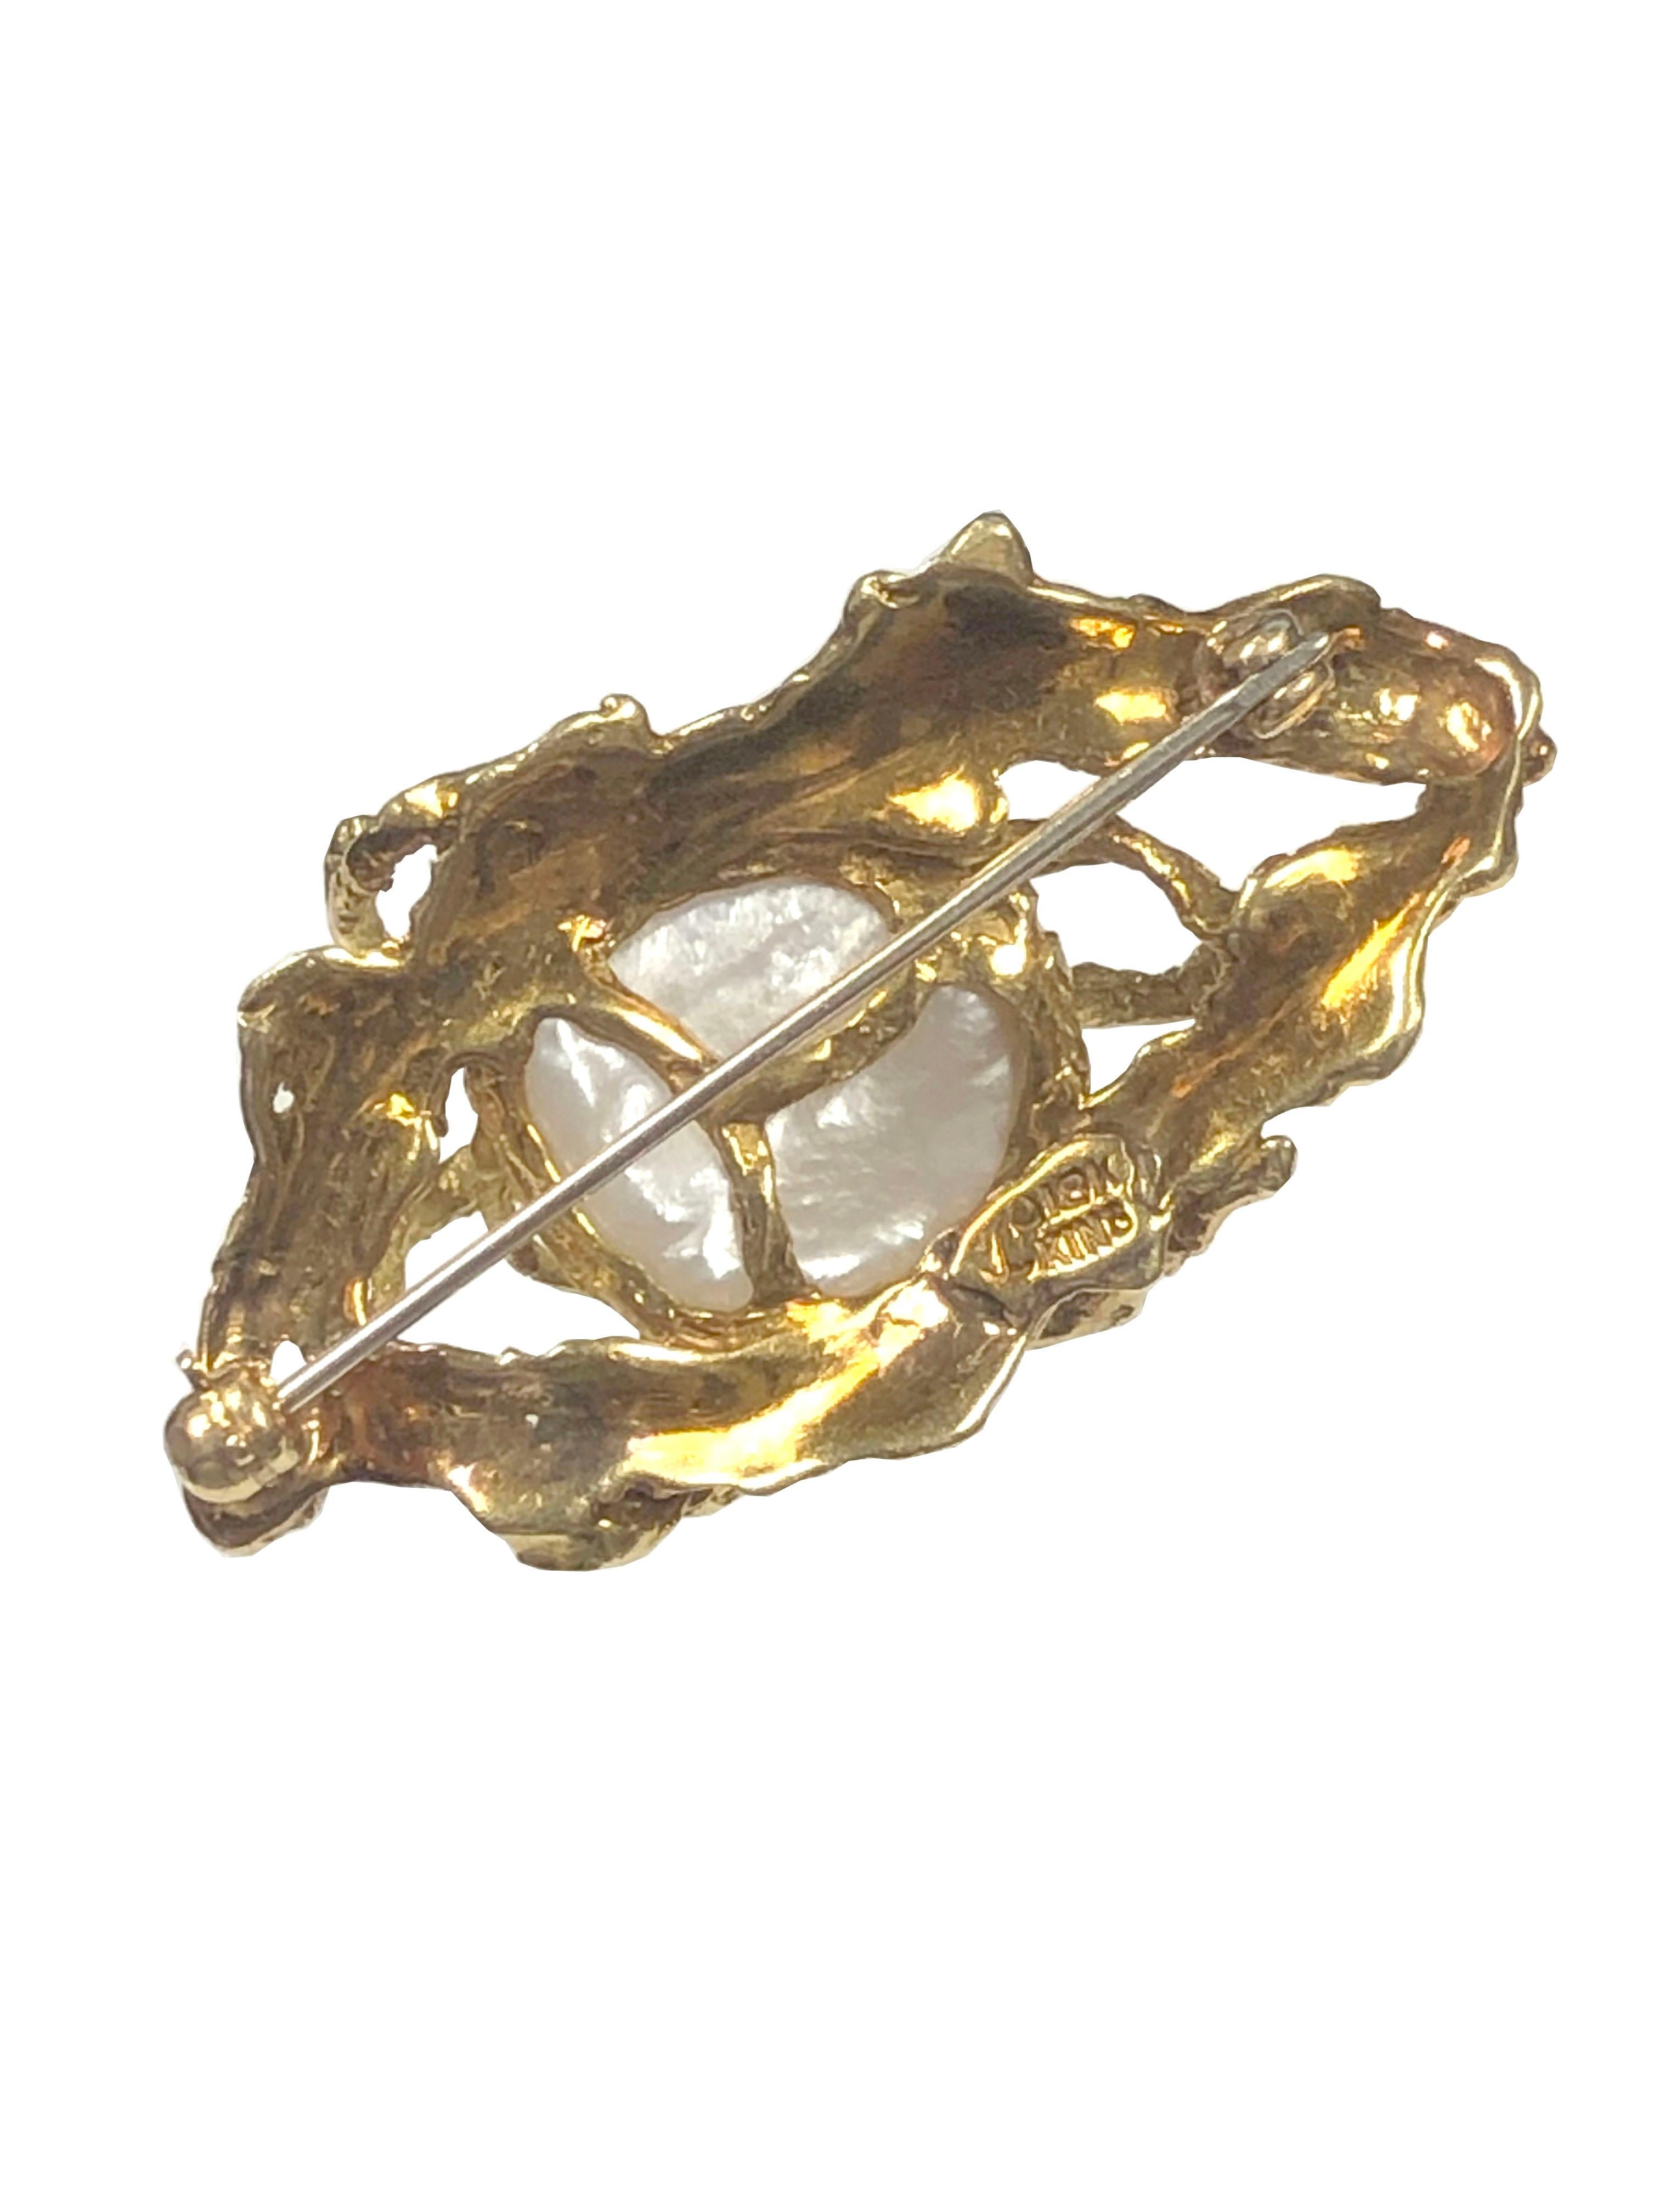 Circa 1960s Arthur King 18k Yellow Gold Free Form Brooch, measuring 1 3/4 inches in length X 1 inch and weighing 16.6 Grams, centrally set with a Natural Fresh Water Pearl measuring 14 x 12 M.M. 